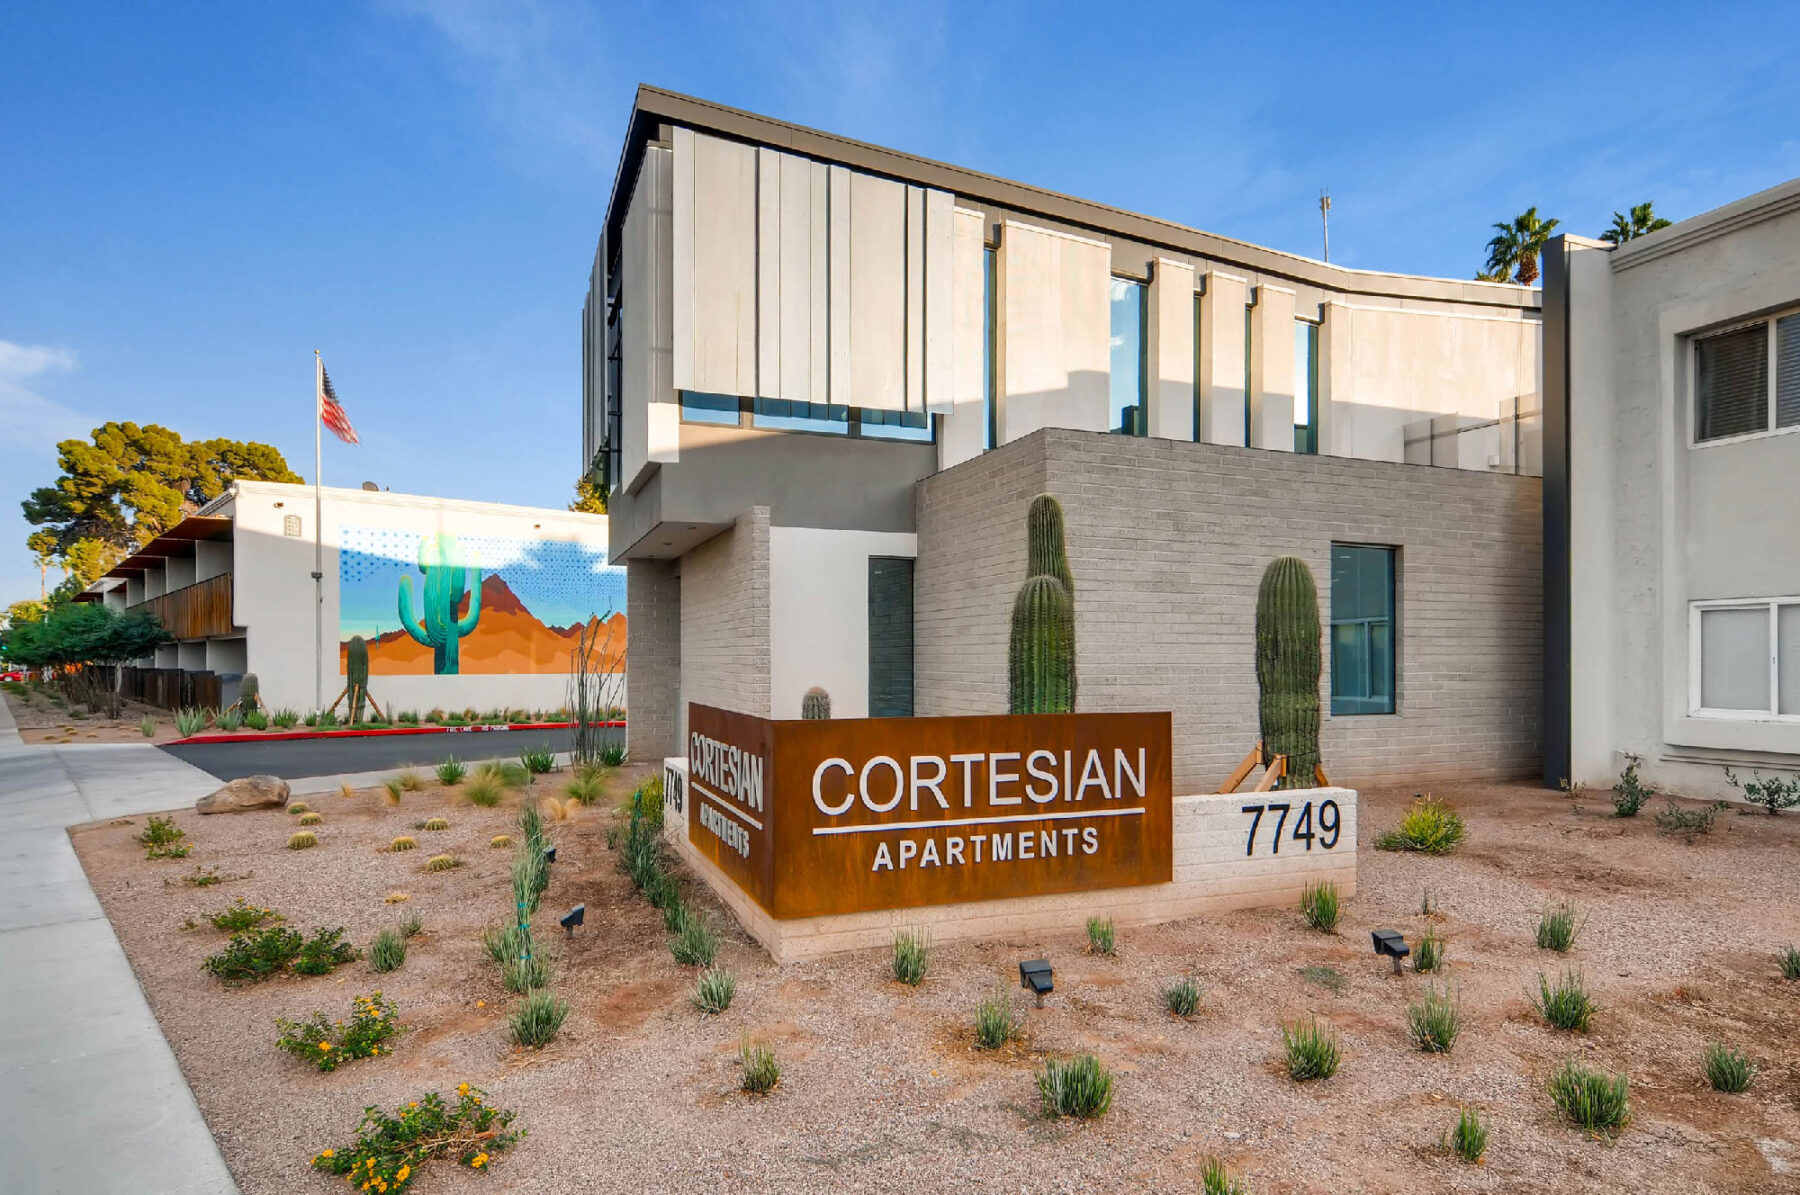 Exterior with view of front sign Cortesian Apartments